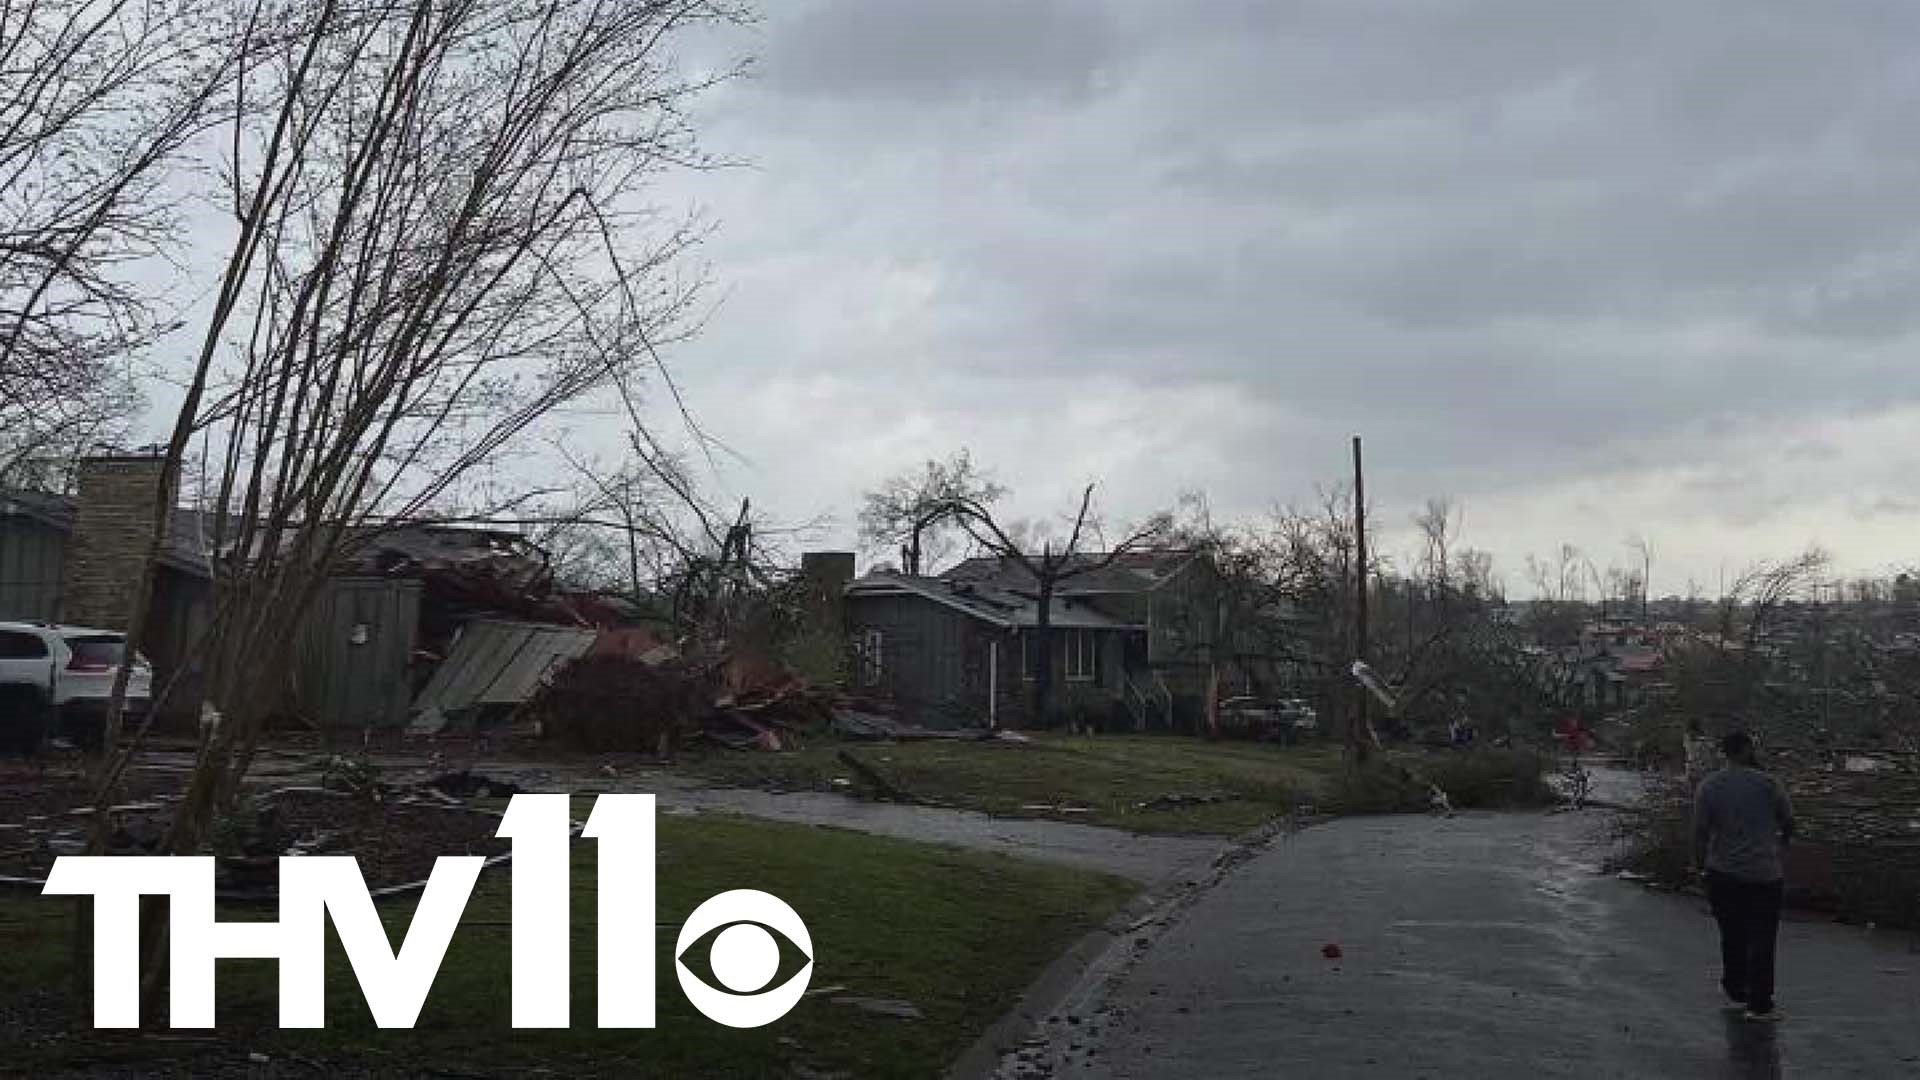 More photos and videos are coming out of the damage left behind by the tornados that impacted Little Rock.